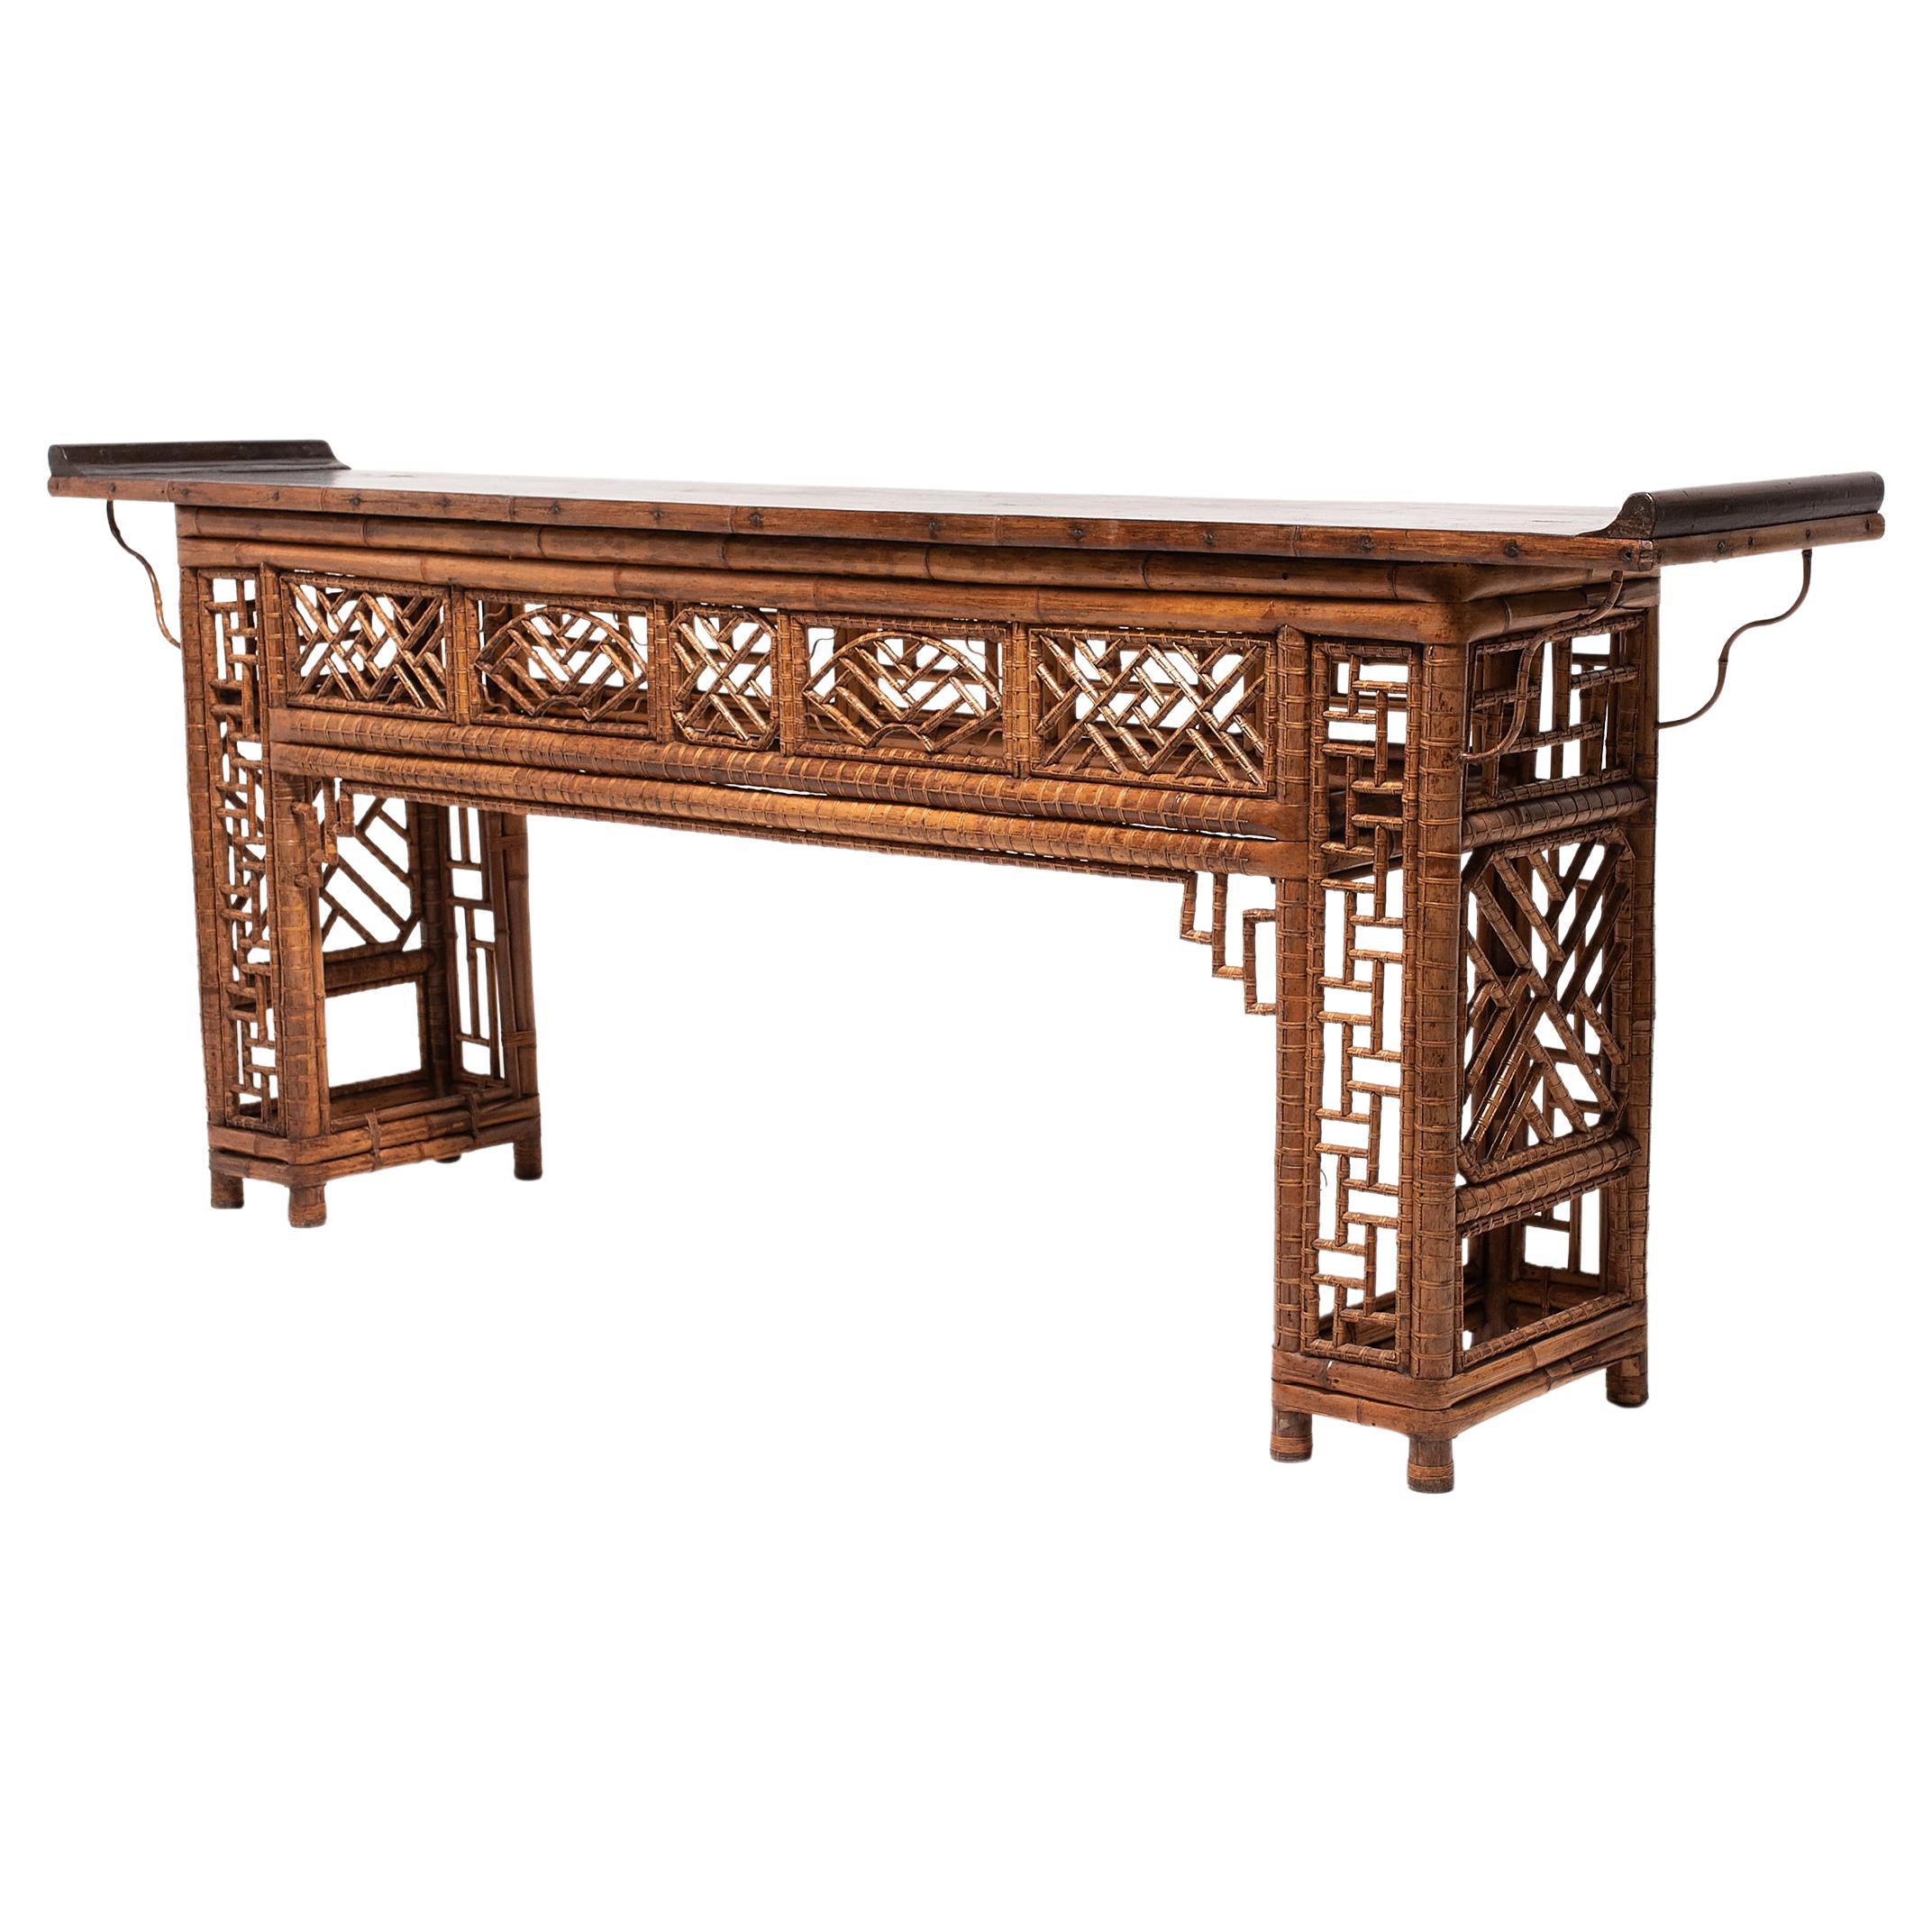 Chinese Spotted Bamboo Altar Table, C. 1850